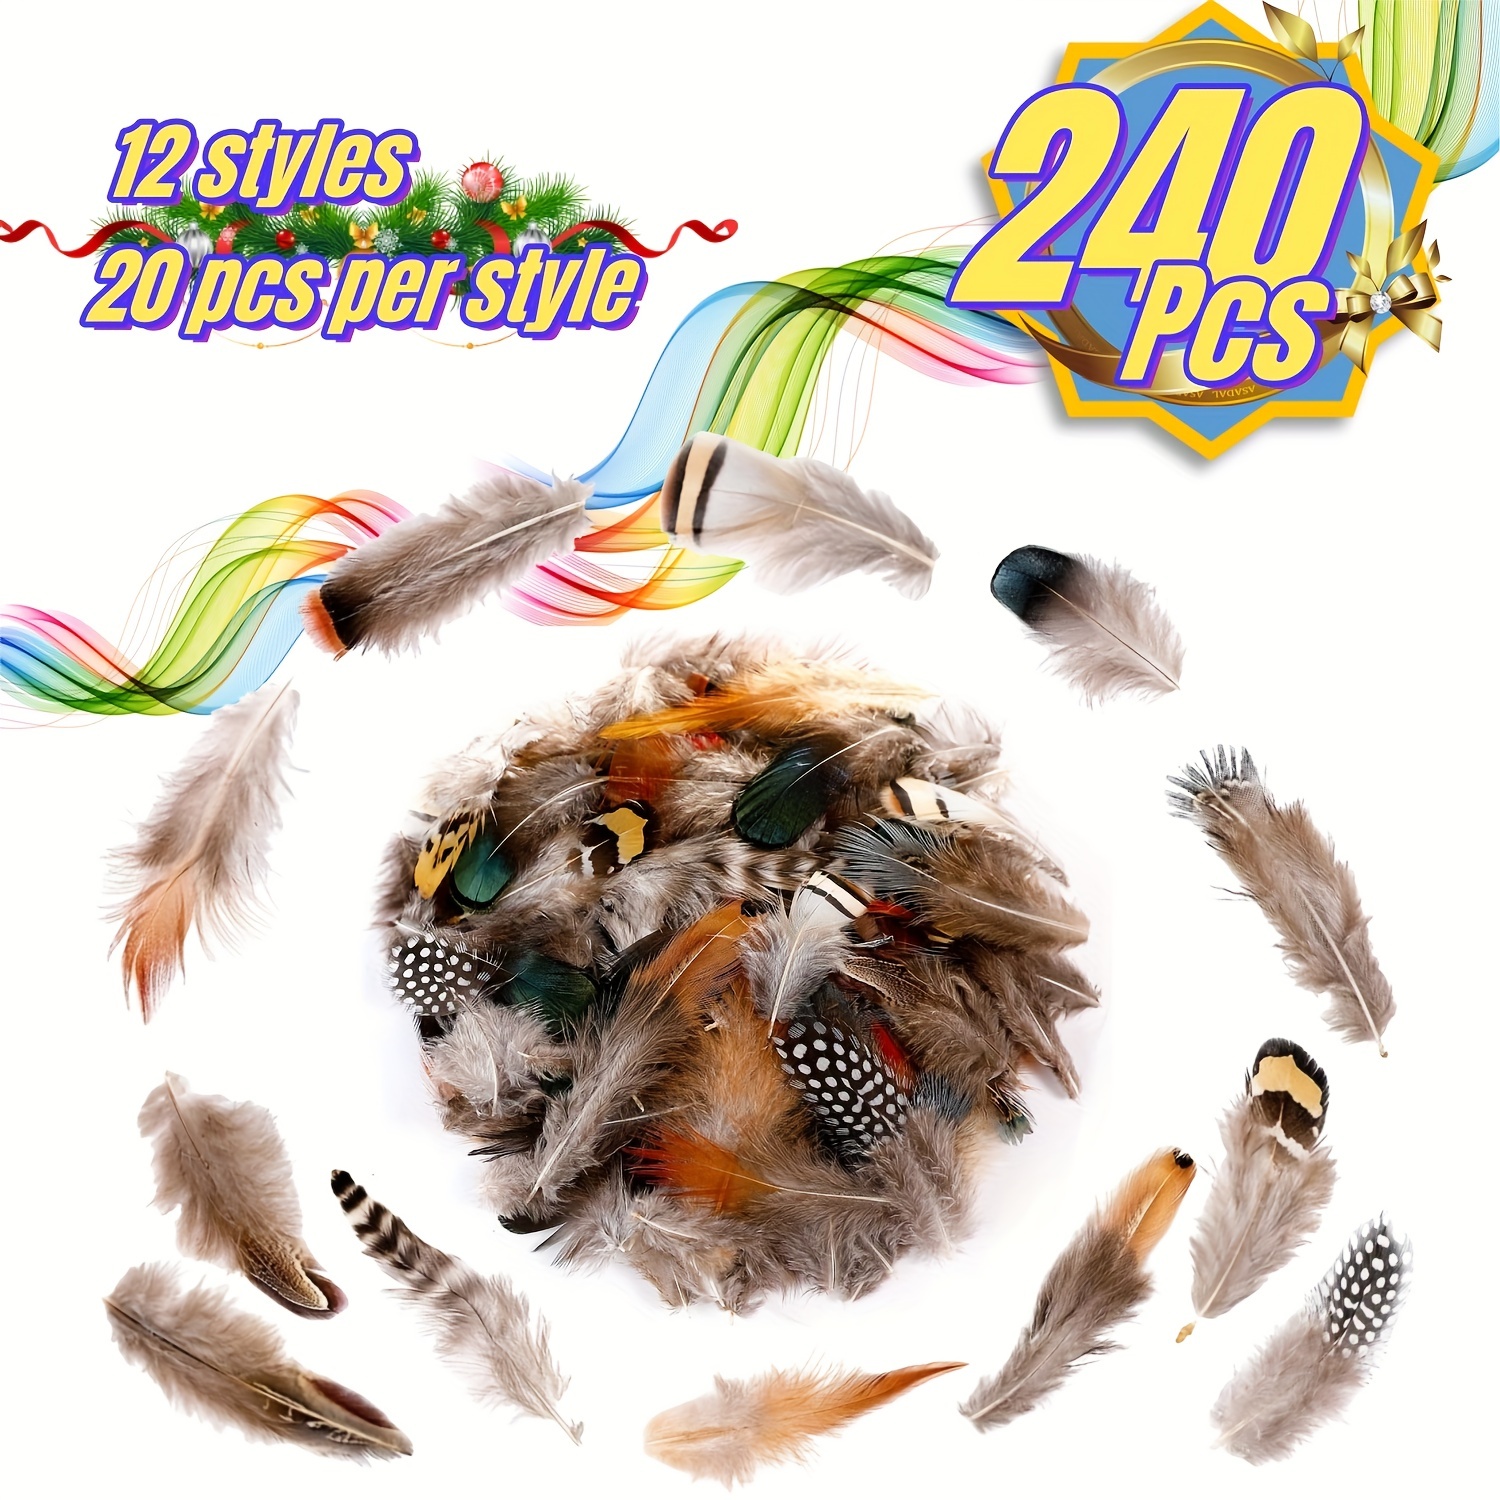 Cheap 200Pcs 4-6 Inch Feathers for Crafting Mixed-Colors Feathers